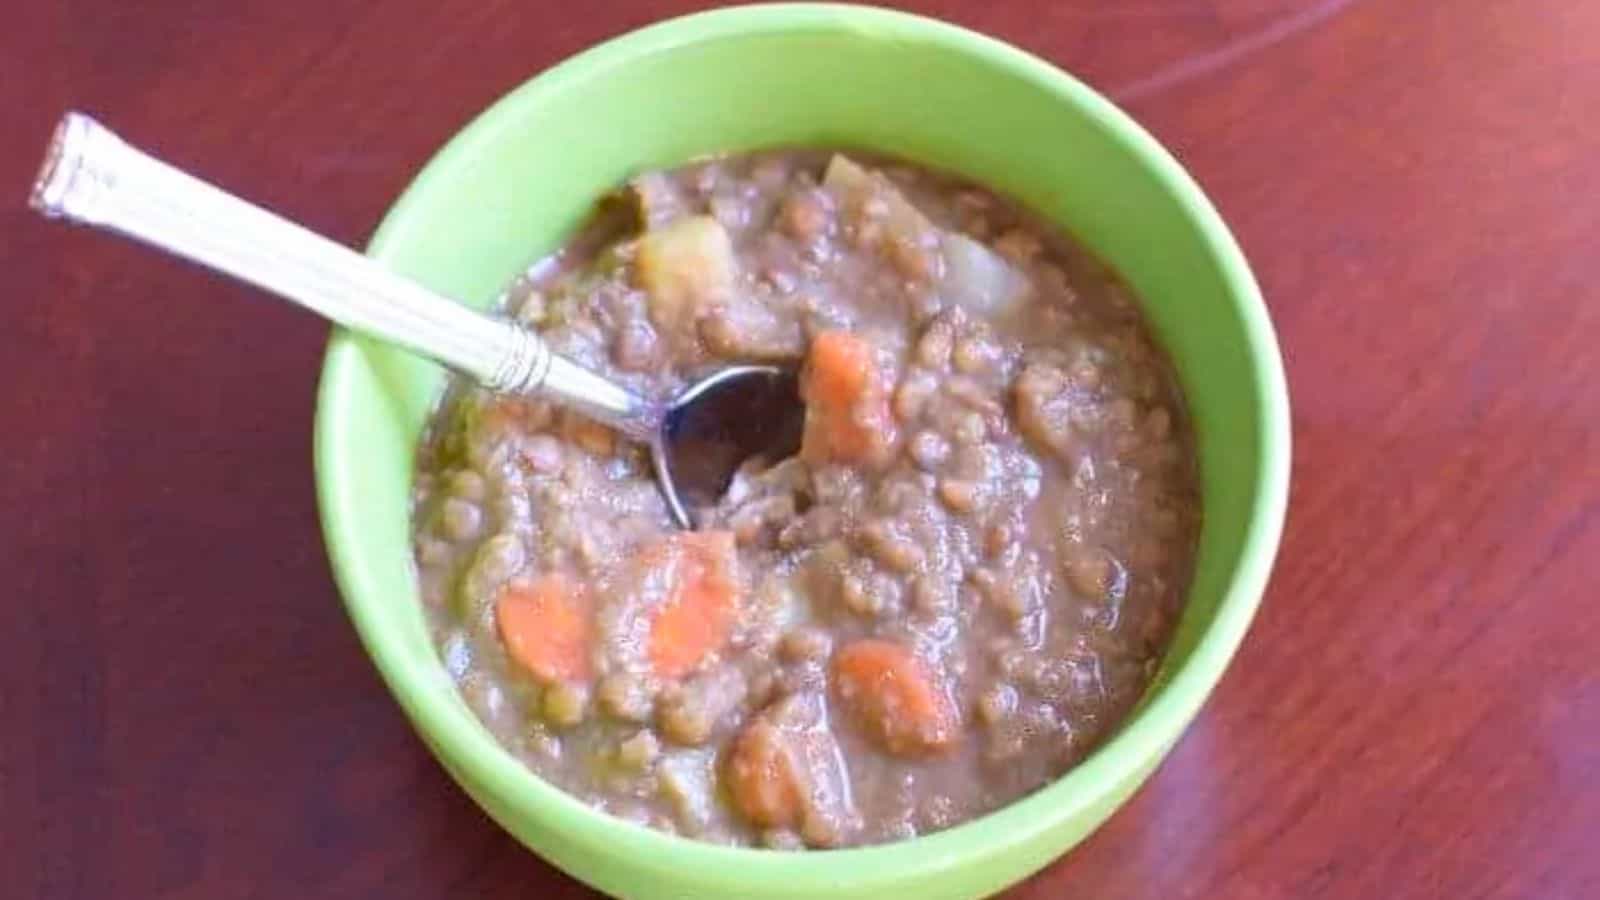 Image shows A bowl of lentil soup with a spoon in it.